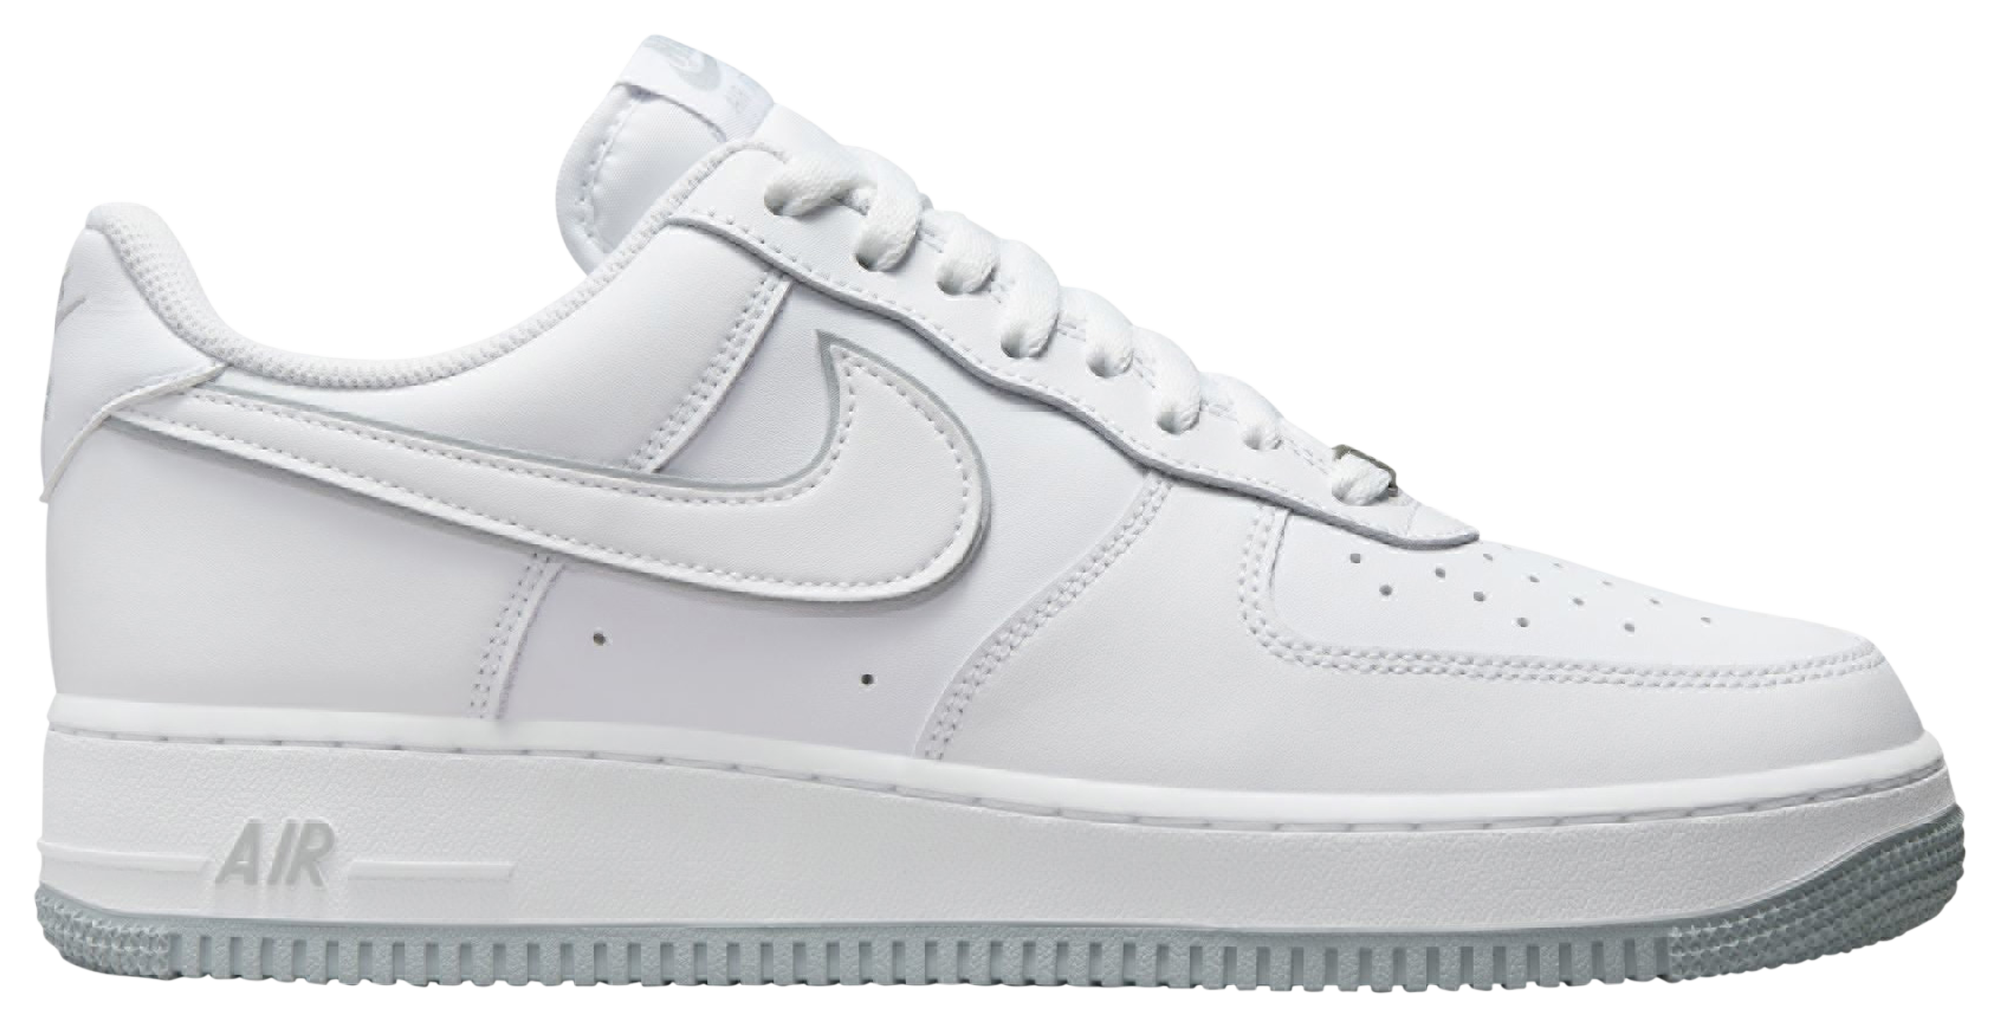 places that sell air force 1s near me